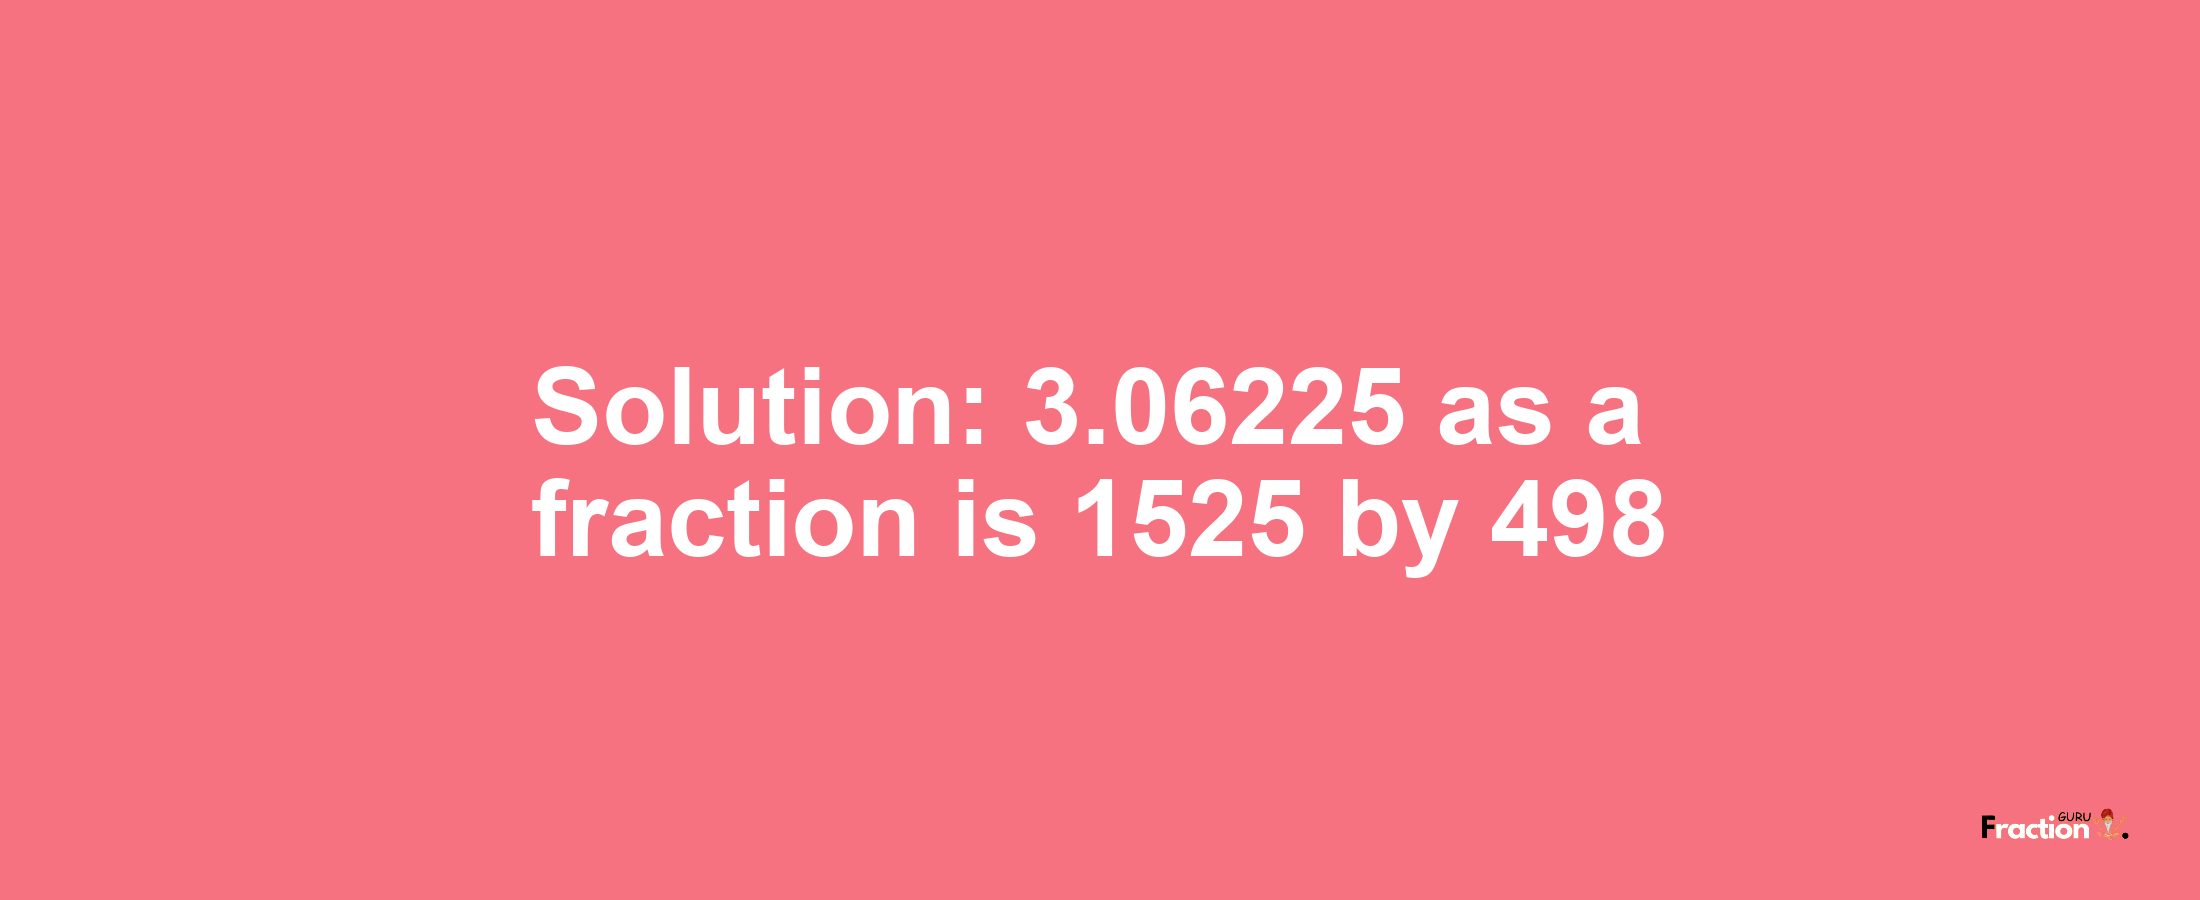 Solution:3.06225 as a fraction is 1525/498